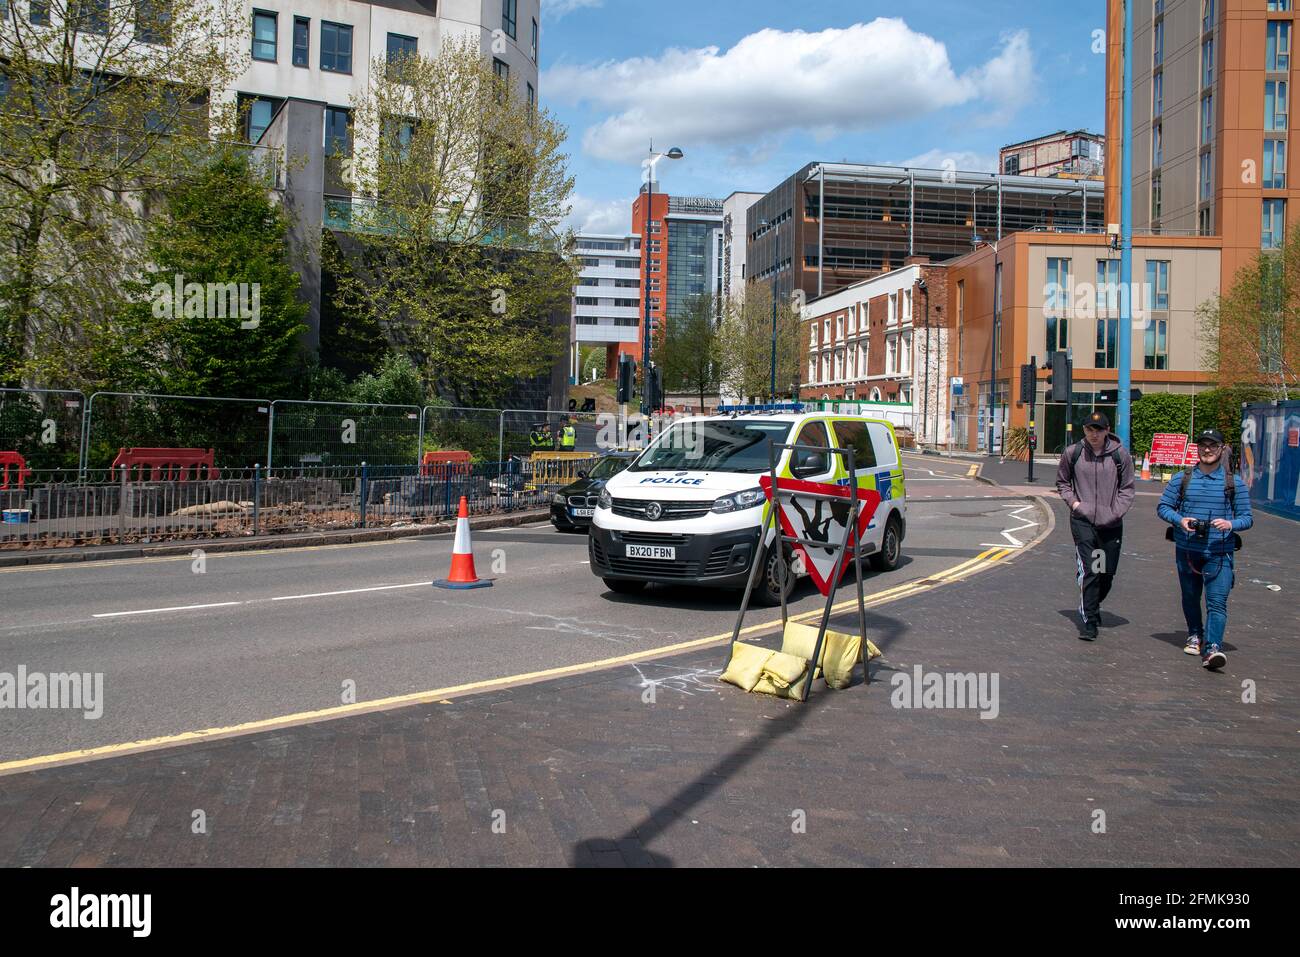 Birmingham, UK. 10th May 2021: The scene of body parts found in Birmingham with passers-by and Birmingham Metropolitan College in the background. West Midlands Police are investigating after human remains were discovered under a pavement by construction workers on Sunday morning (9th May 2021). Credit: Ryan Underwood / Alamy Live New Stock Photo